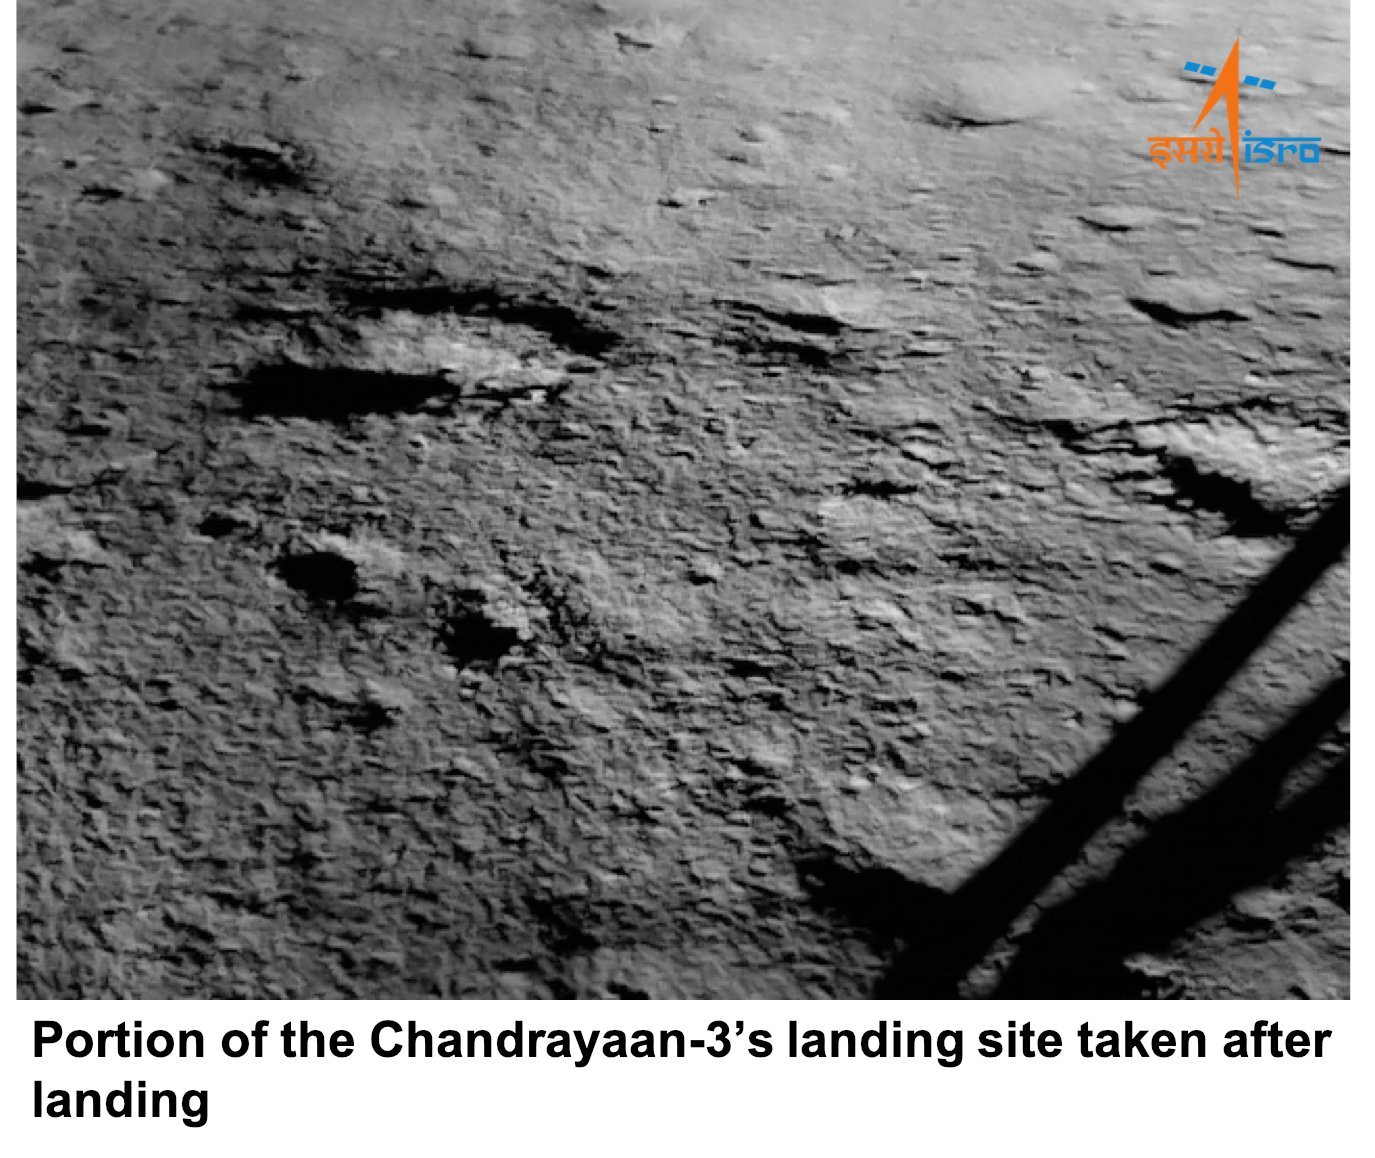 The Chandrayaan-3 spacecraft launched by the Indian Space Research Organisation (ISRO) on 14th July, has successfully landed on the Moon